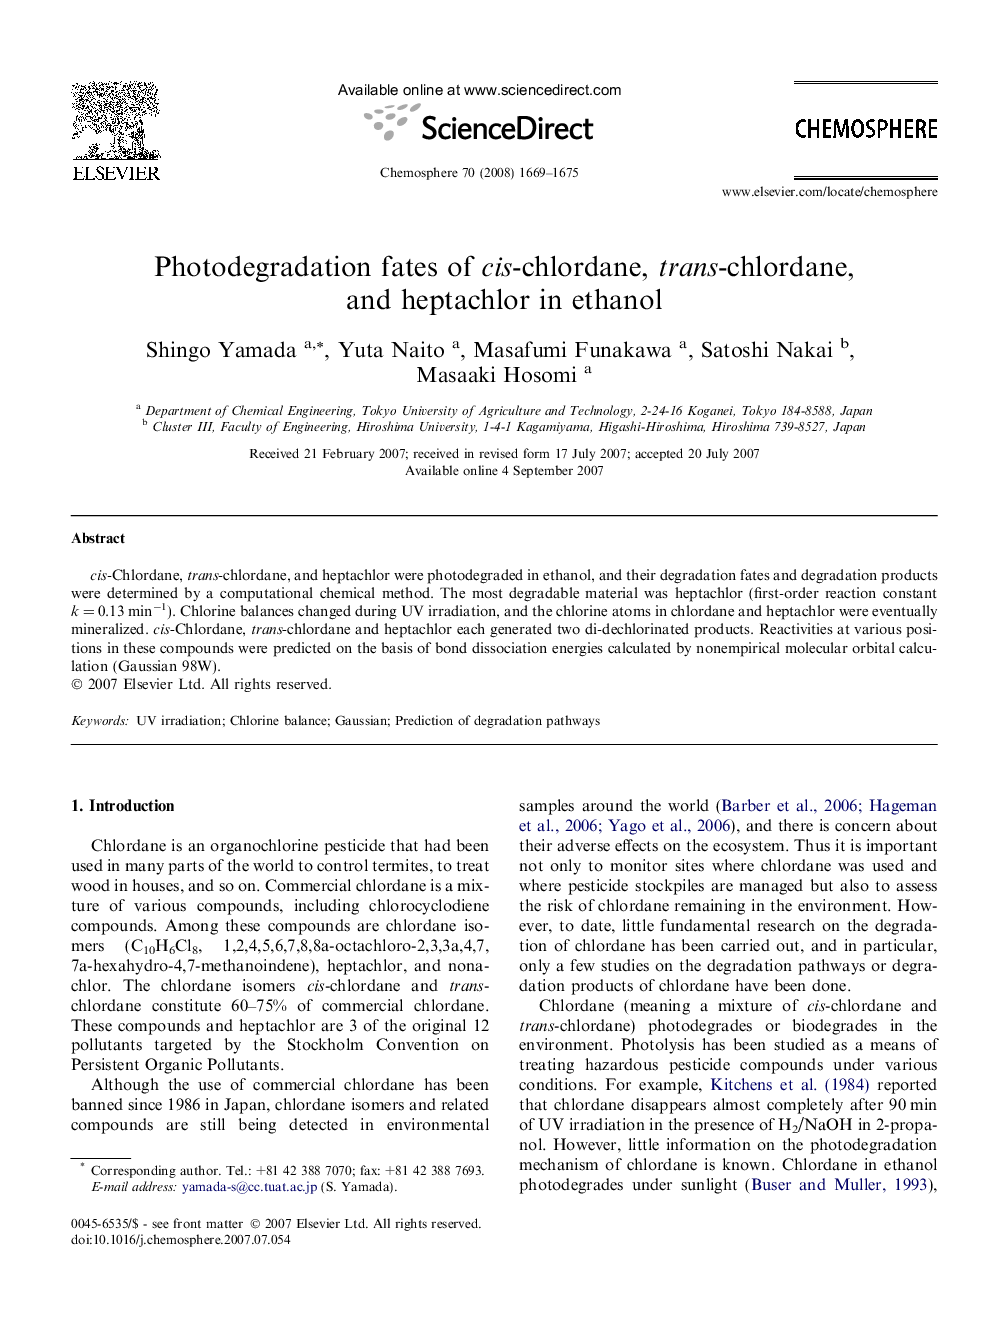 Photodegradation fates of cis-chlordane, trans-chlordane, and heptachlor in ethanol